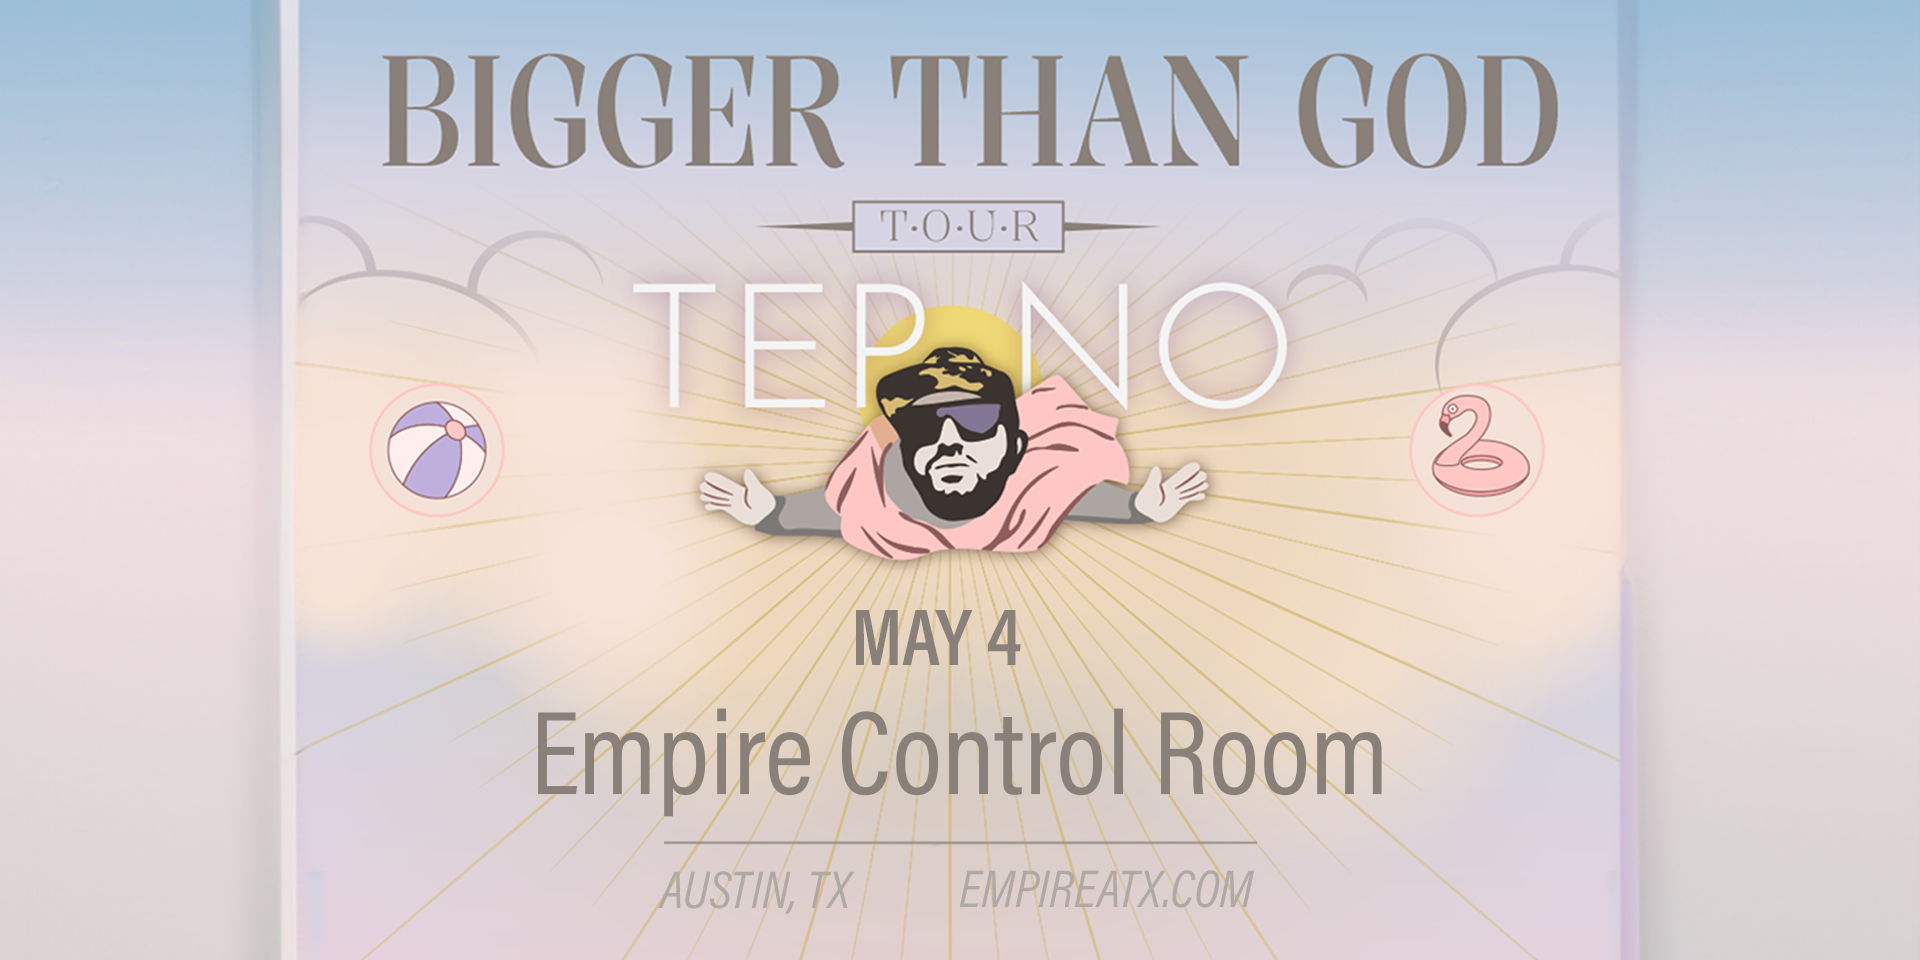 Empire Presents: Tep No's Bigger Than God Tour at Empire Control Room on 5/4 promotional image